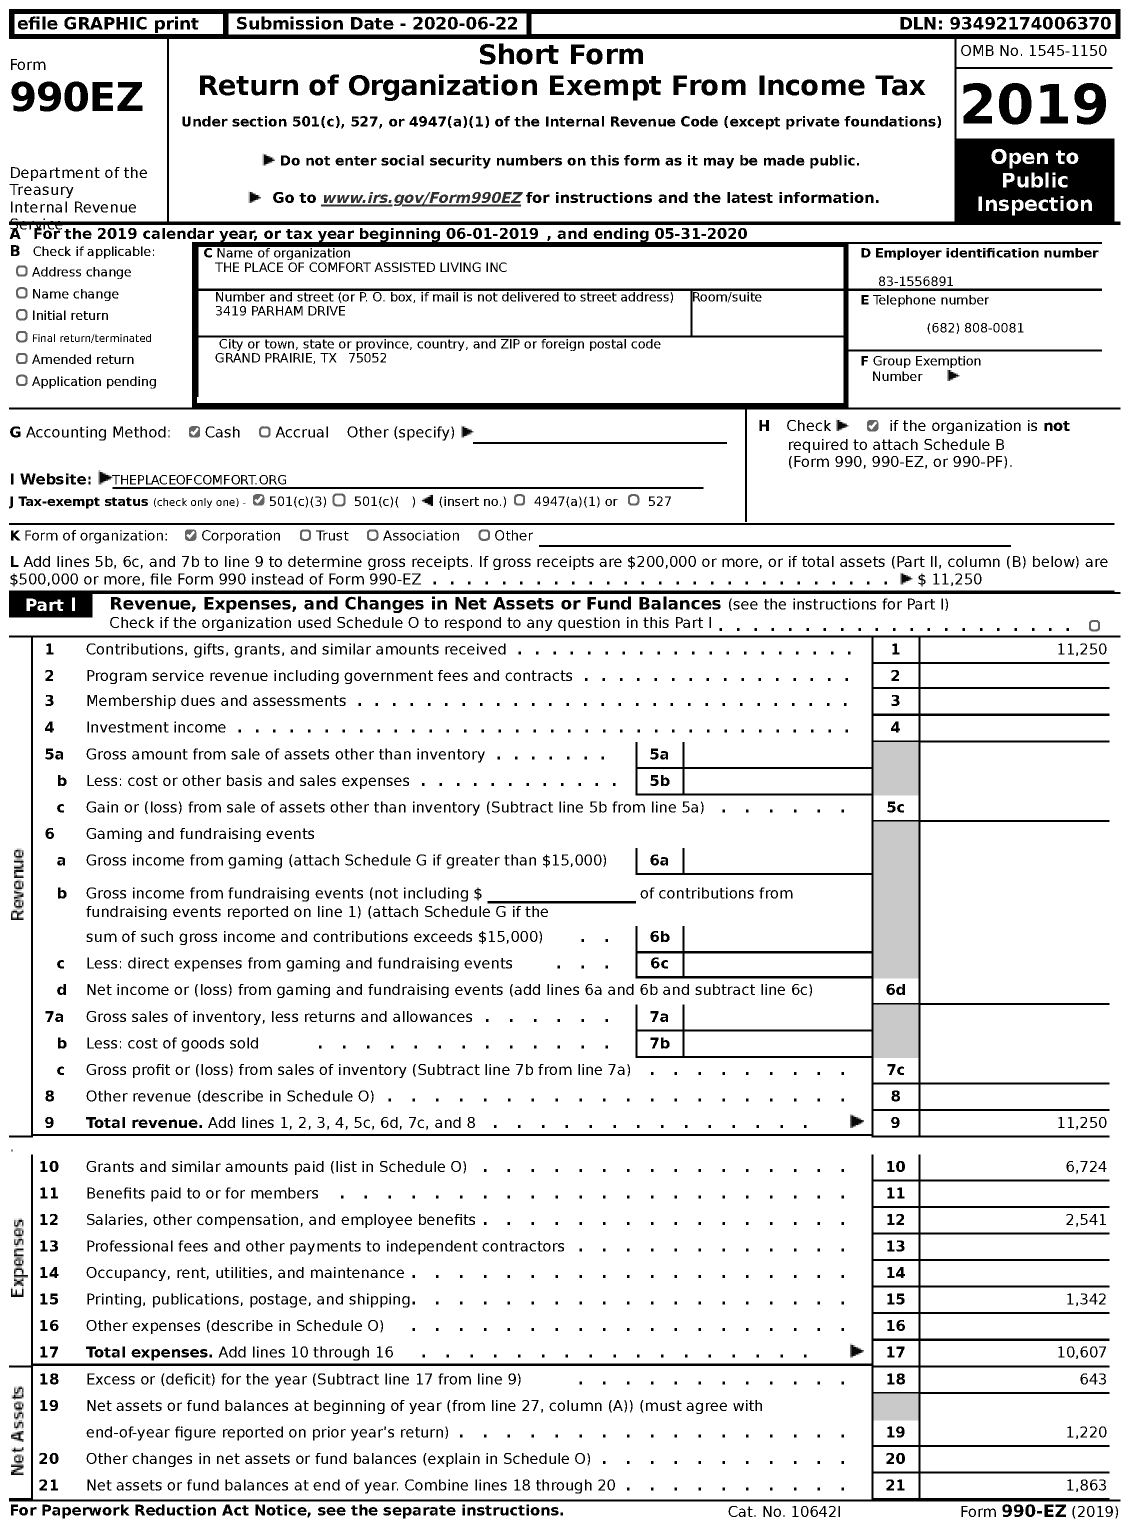 Image of first page of 2019 Form 990EZ for The Place of Comfort Assisted Living